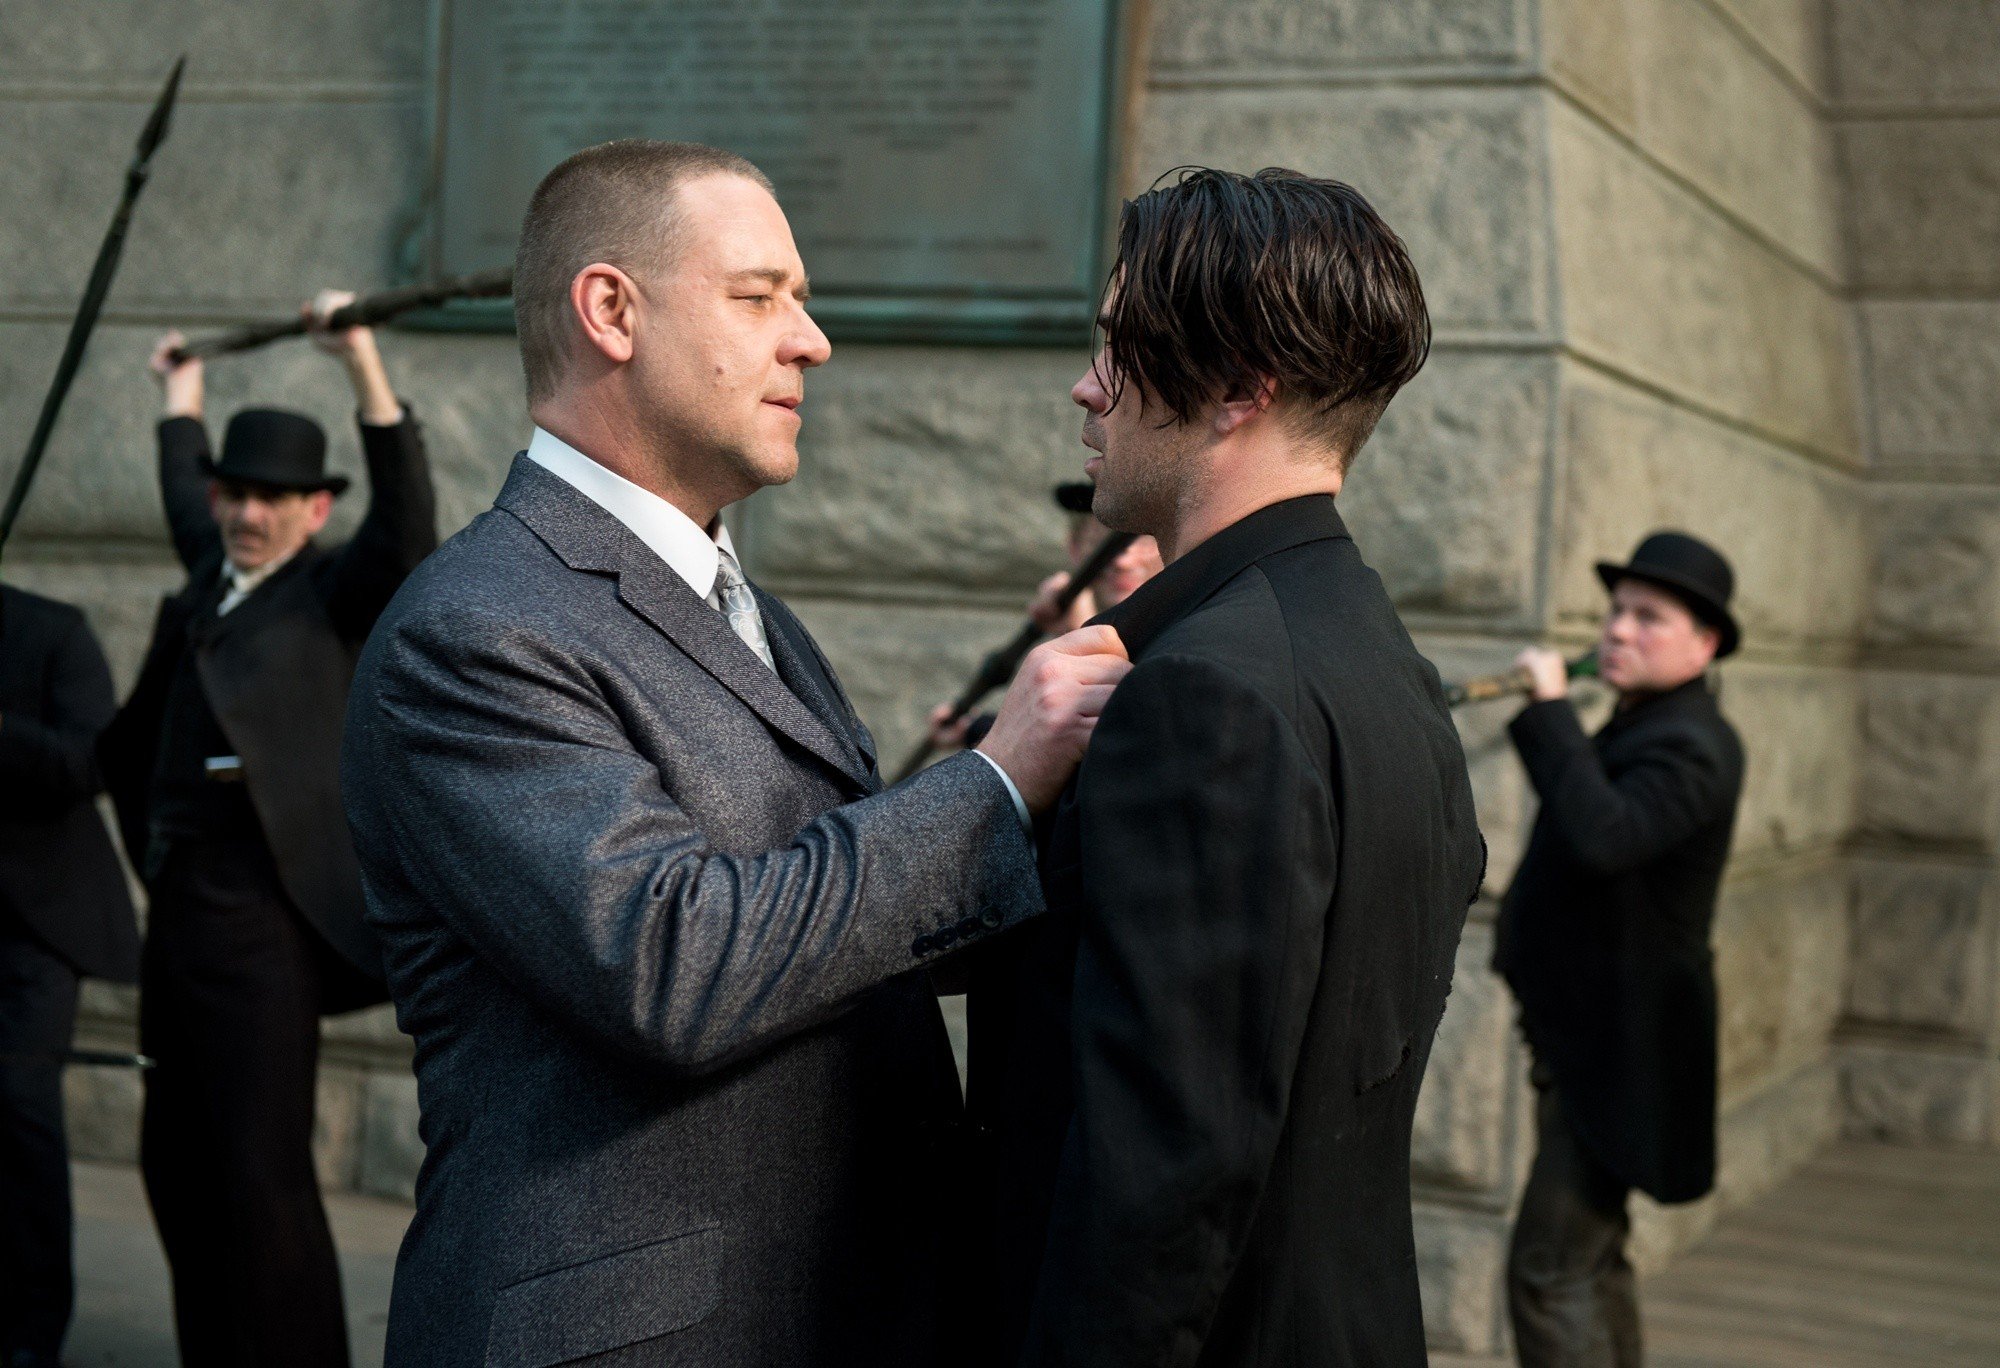 Colin Farrell stars as Peter Lake and Russell Crowe stars as Pearly Soames in Warner Bros. Pictures' Winter's Tale (2014)